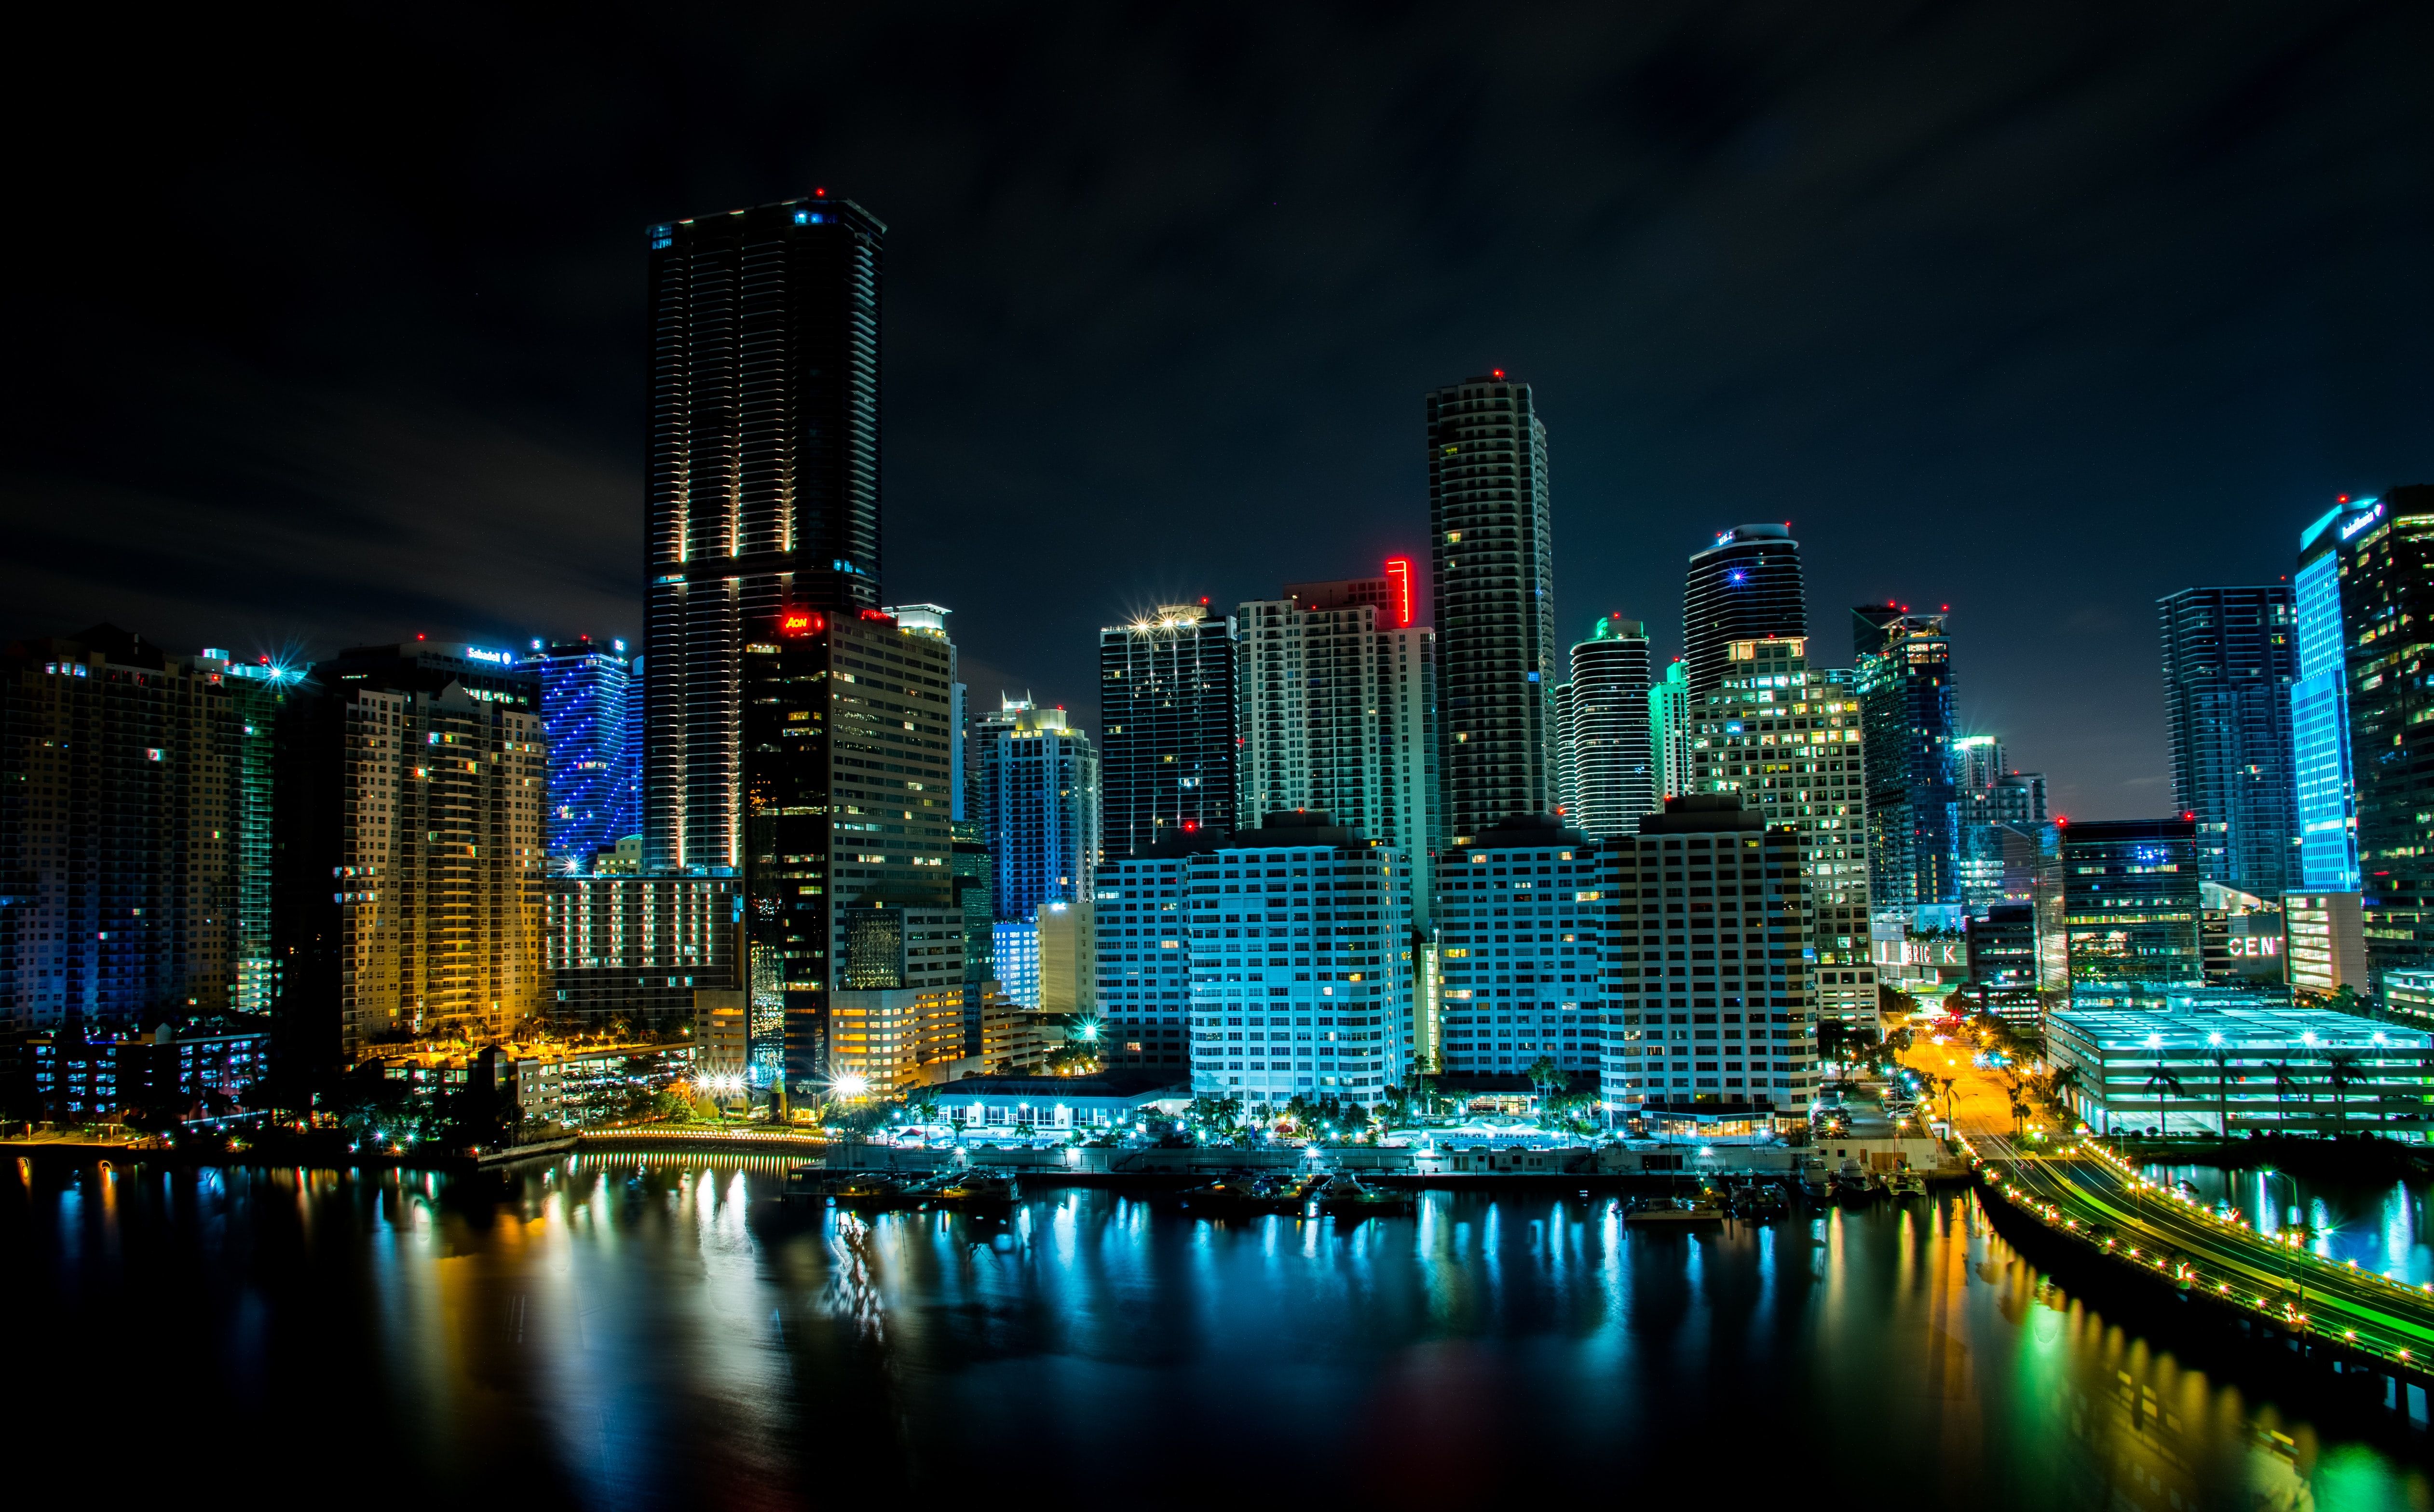 Miami Nights Picture. Download Free Image